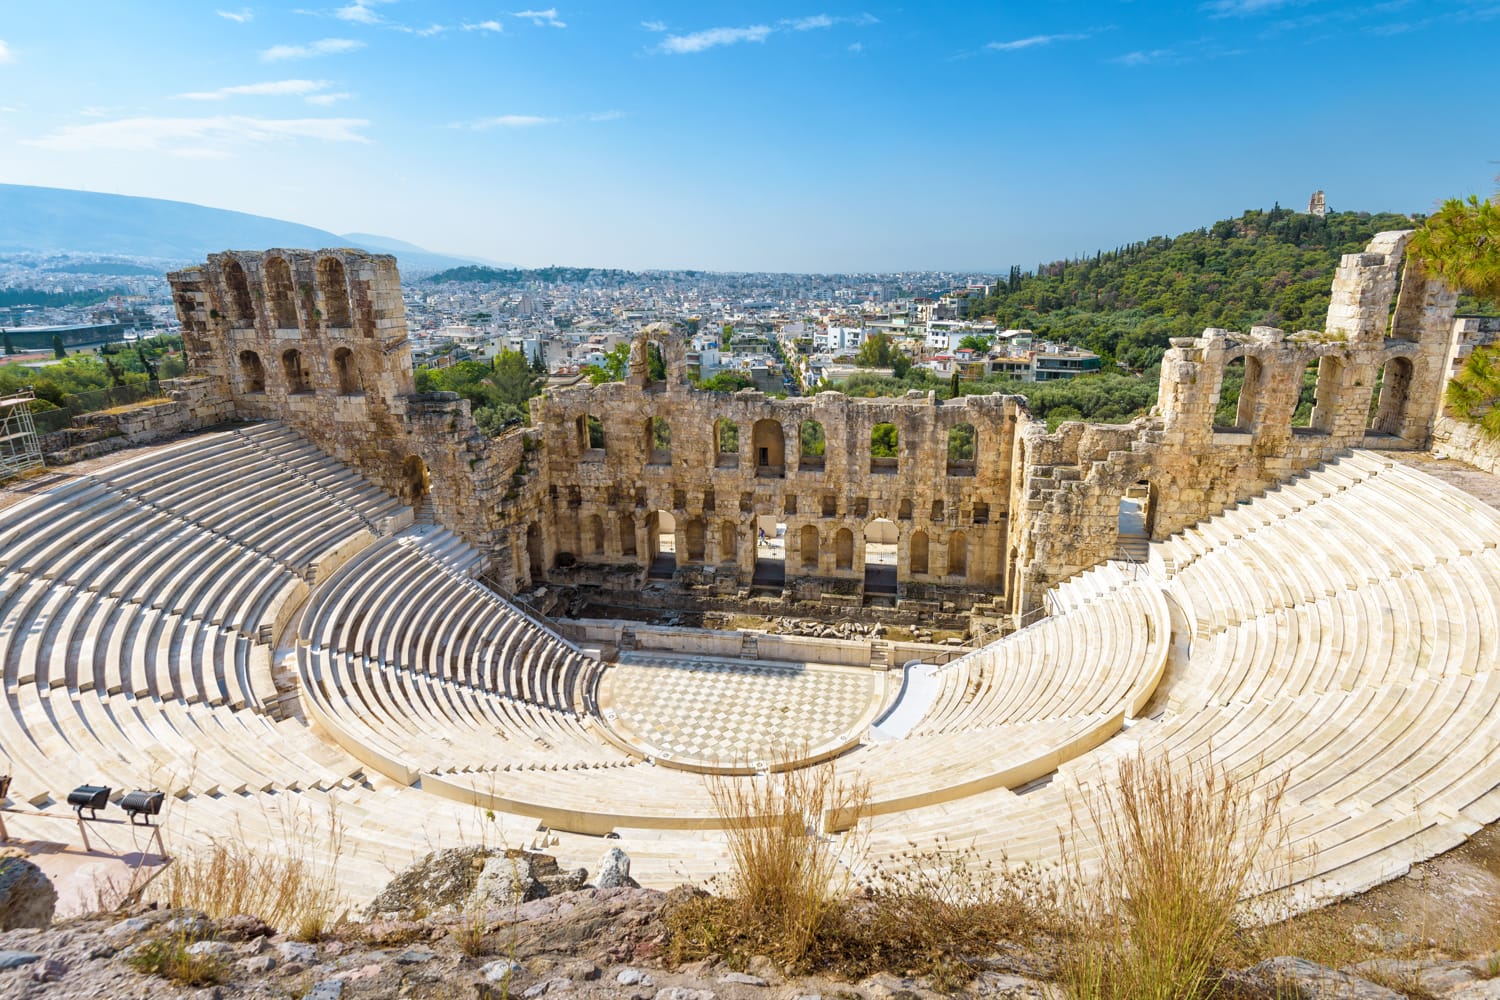 Panoramic view of the Odeon of Herodes Atticus at the Acropolis of Athens, Greece. It is one of the main landmarks of Athens. Scenic panorama of Herod Atticus Odeon overlooking Athens city in summer.